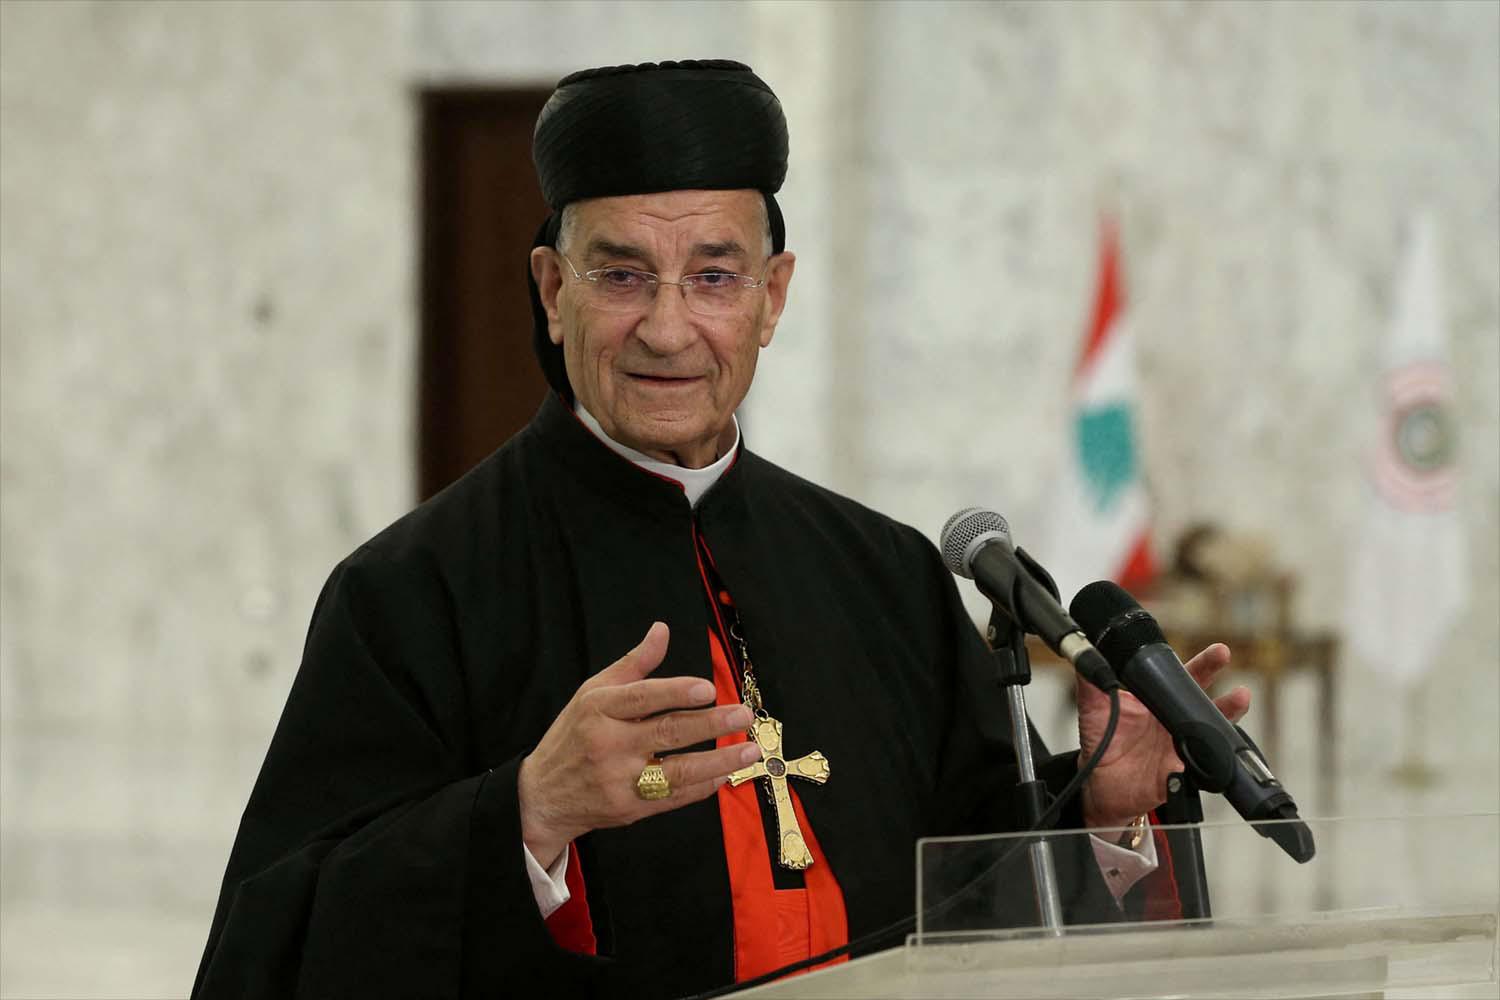 Patriarch Bechara warned that divisions in the nation had widened